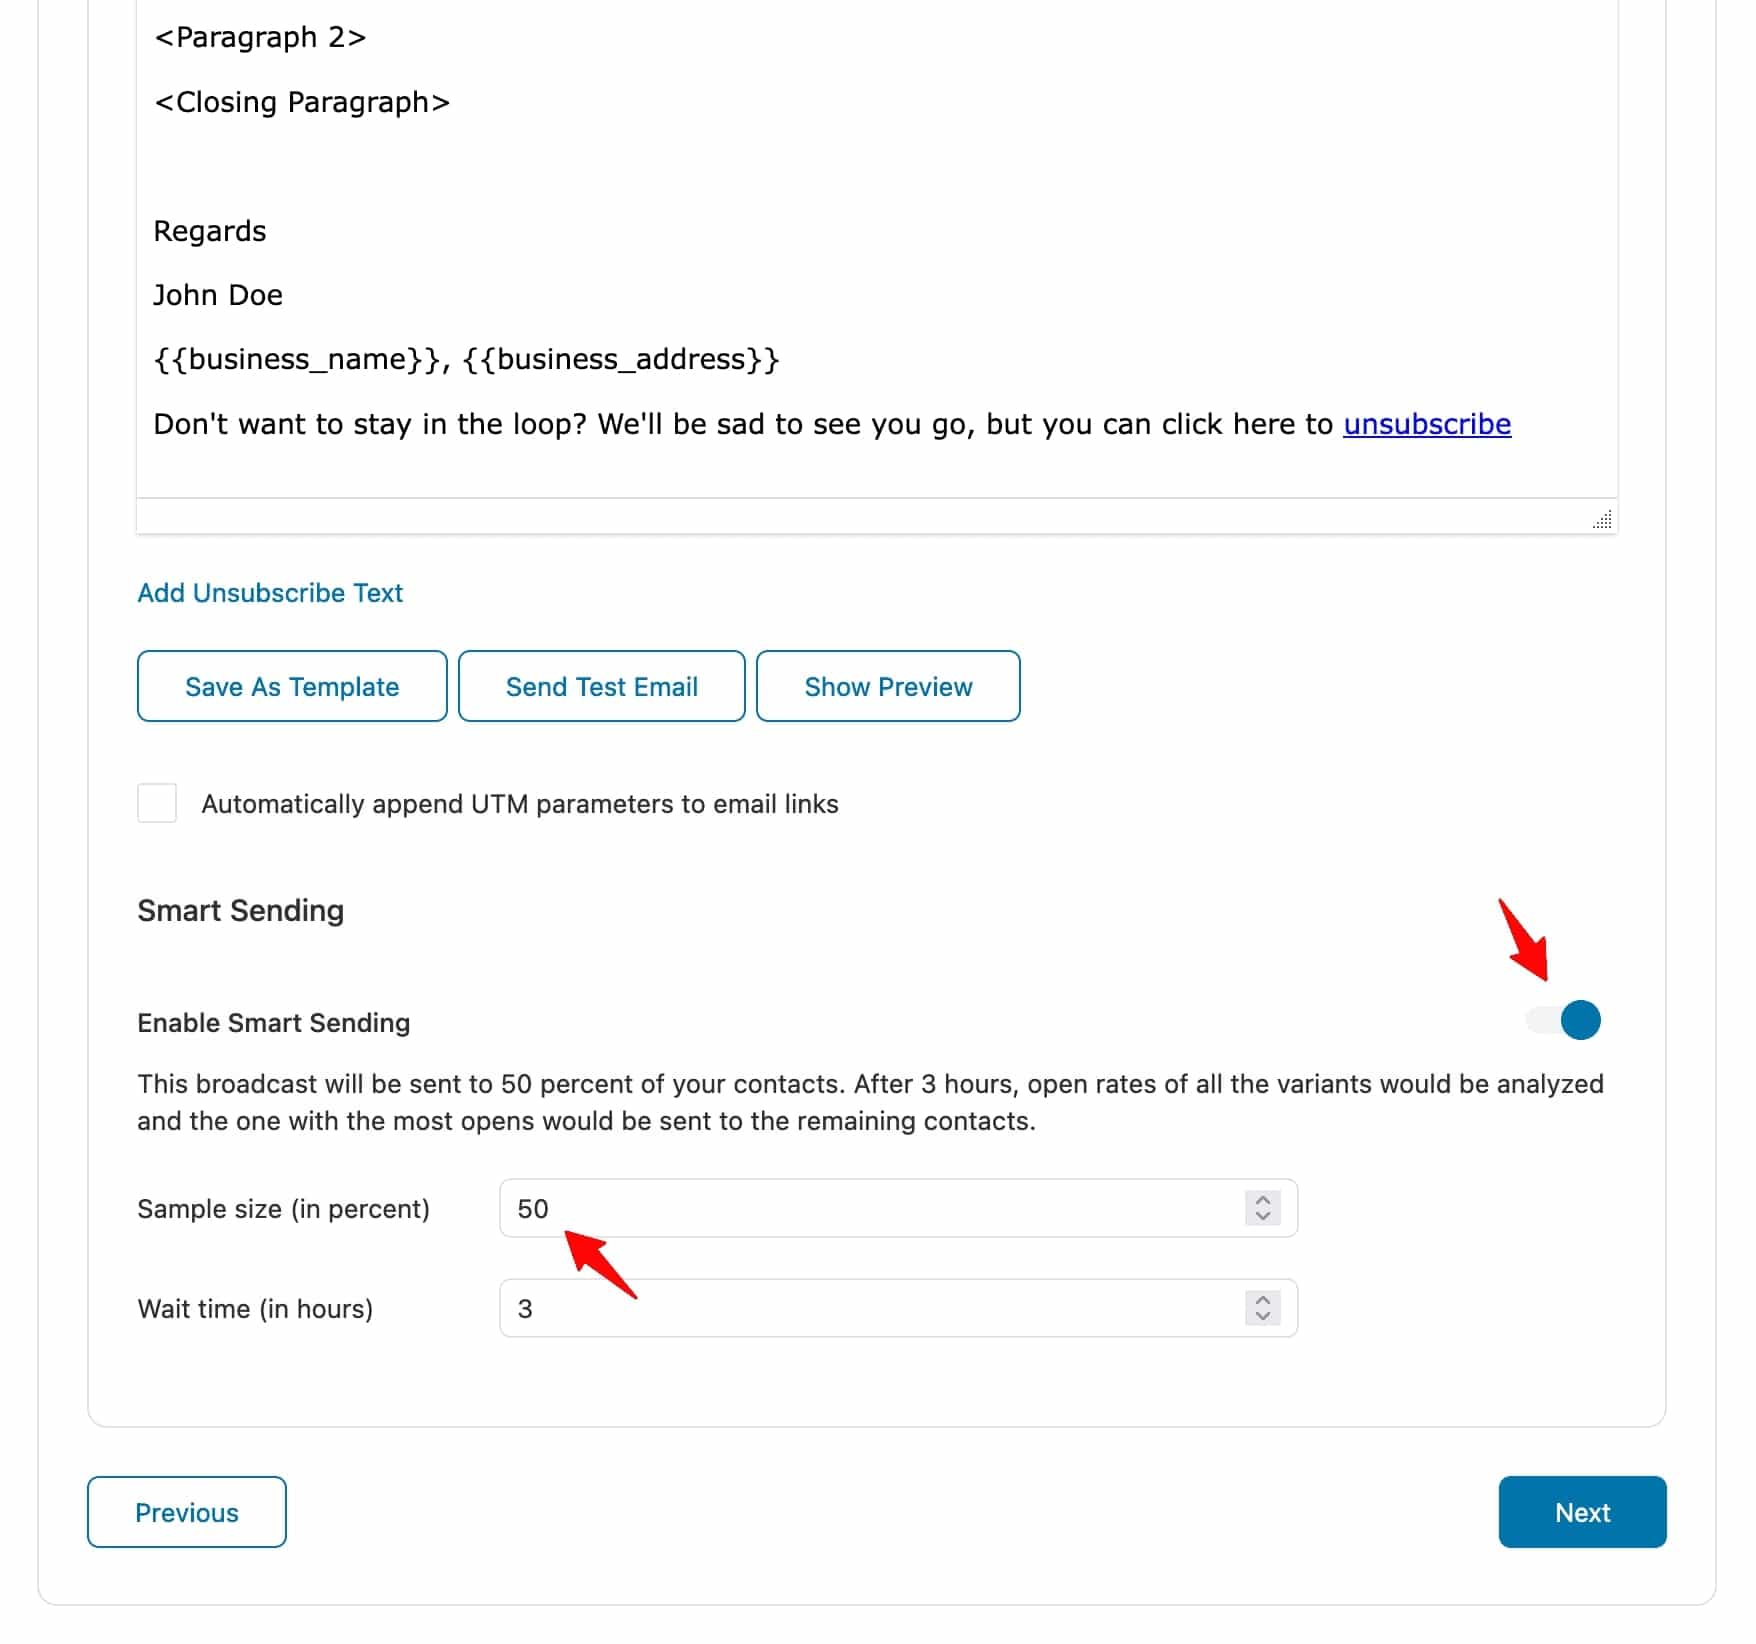 Enable smart sending to send the variations of email broadcasts to the sample size you define